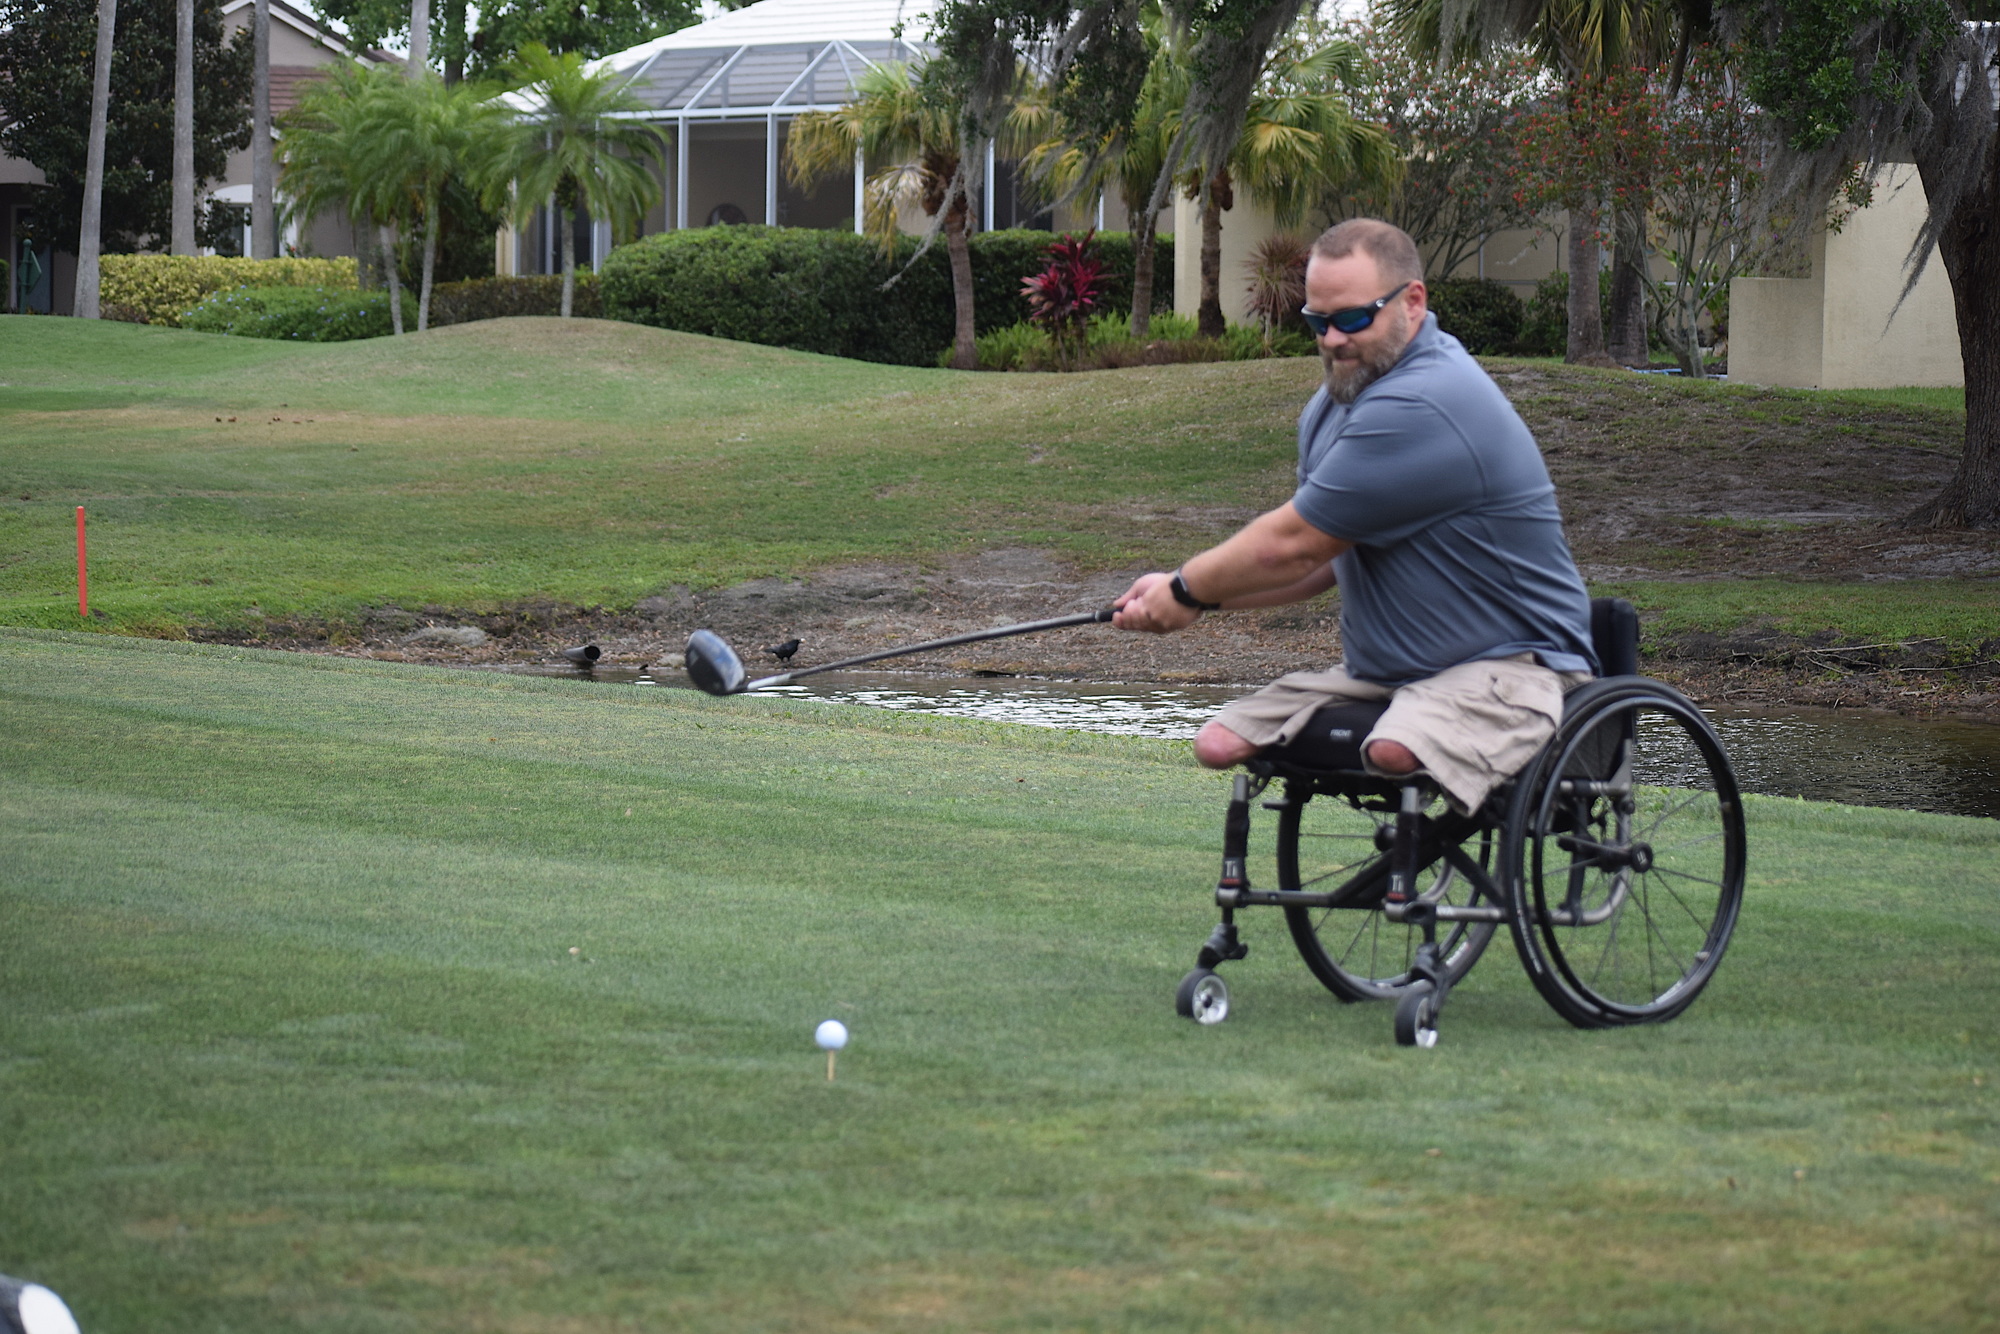 Army Sergeant Chad Rozanski, who was injured in Iraq in 2006, takes a swipe at a golf ball during the Rosedale Golf Classic.